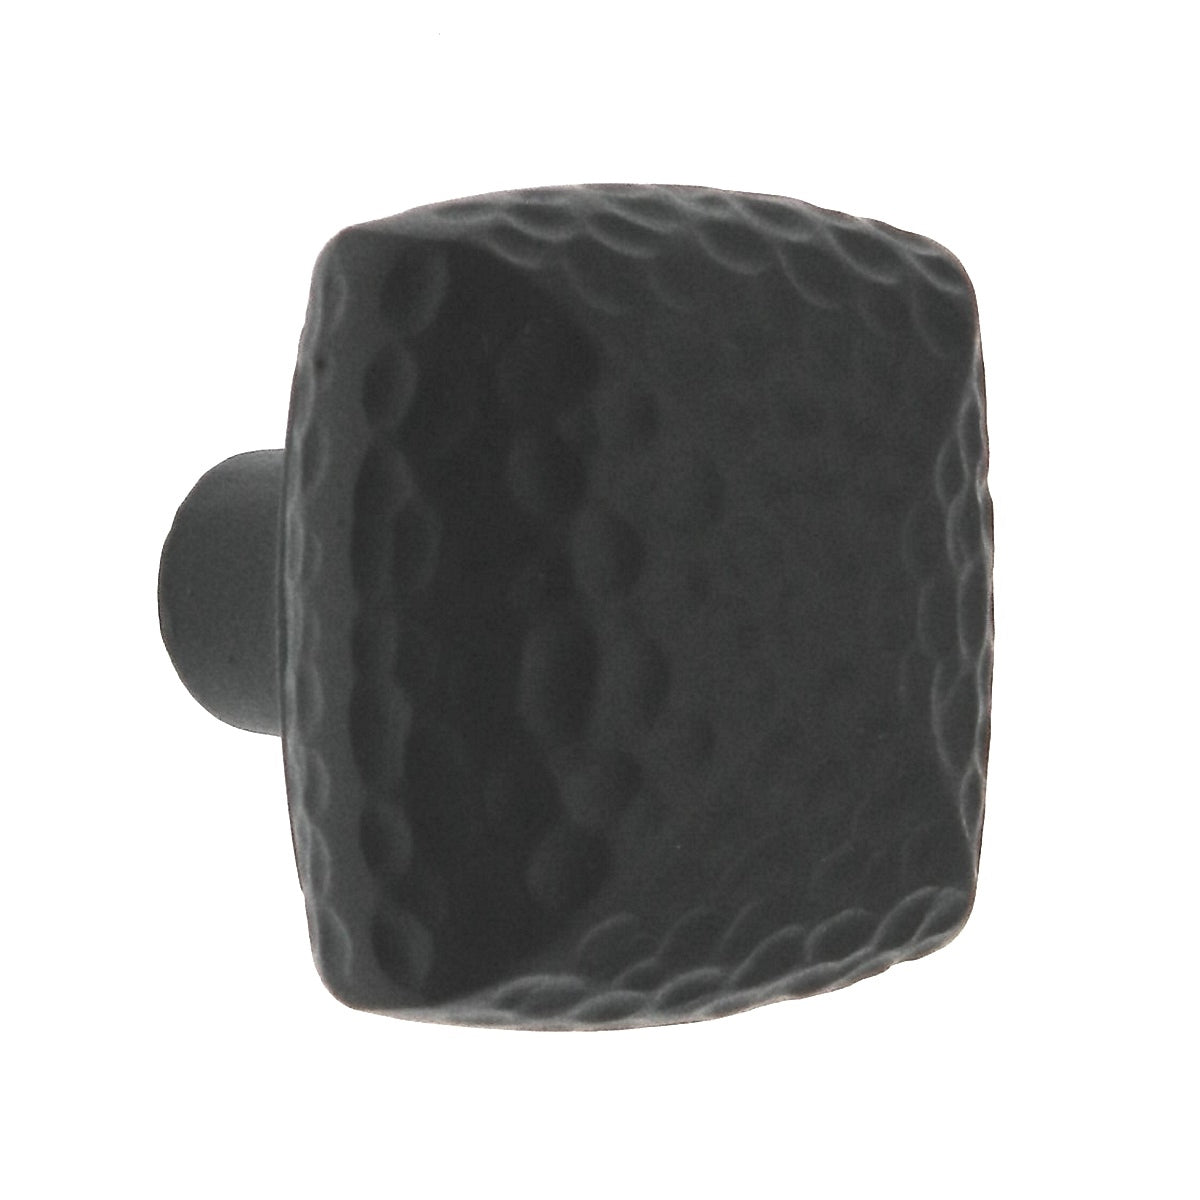 10 Pack Warwick Rustic Black Iron 1 1/8" Hammered Square Cabinet Knob DH1019BL